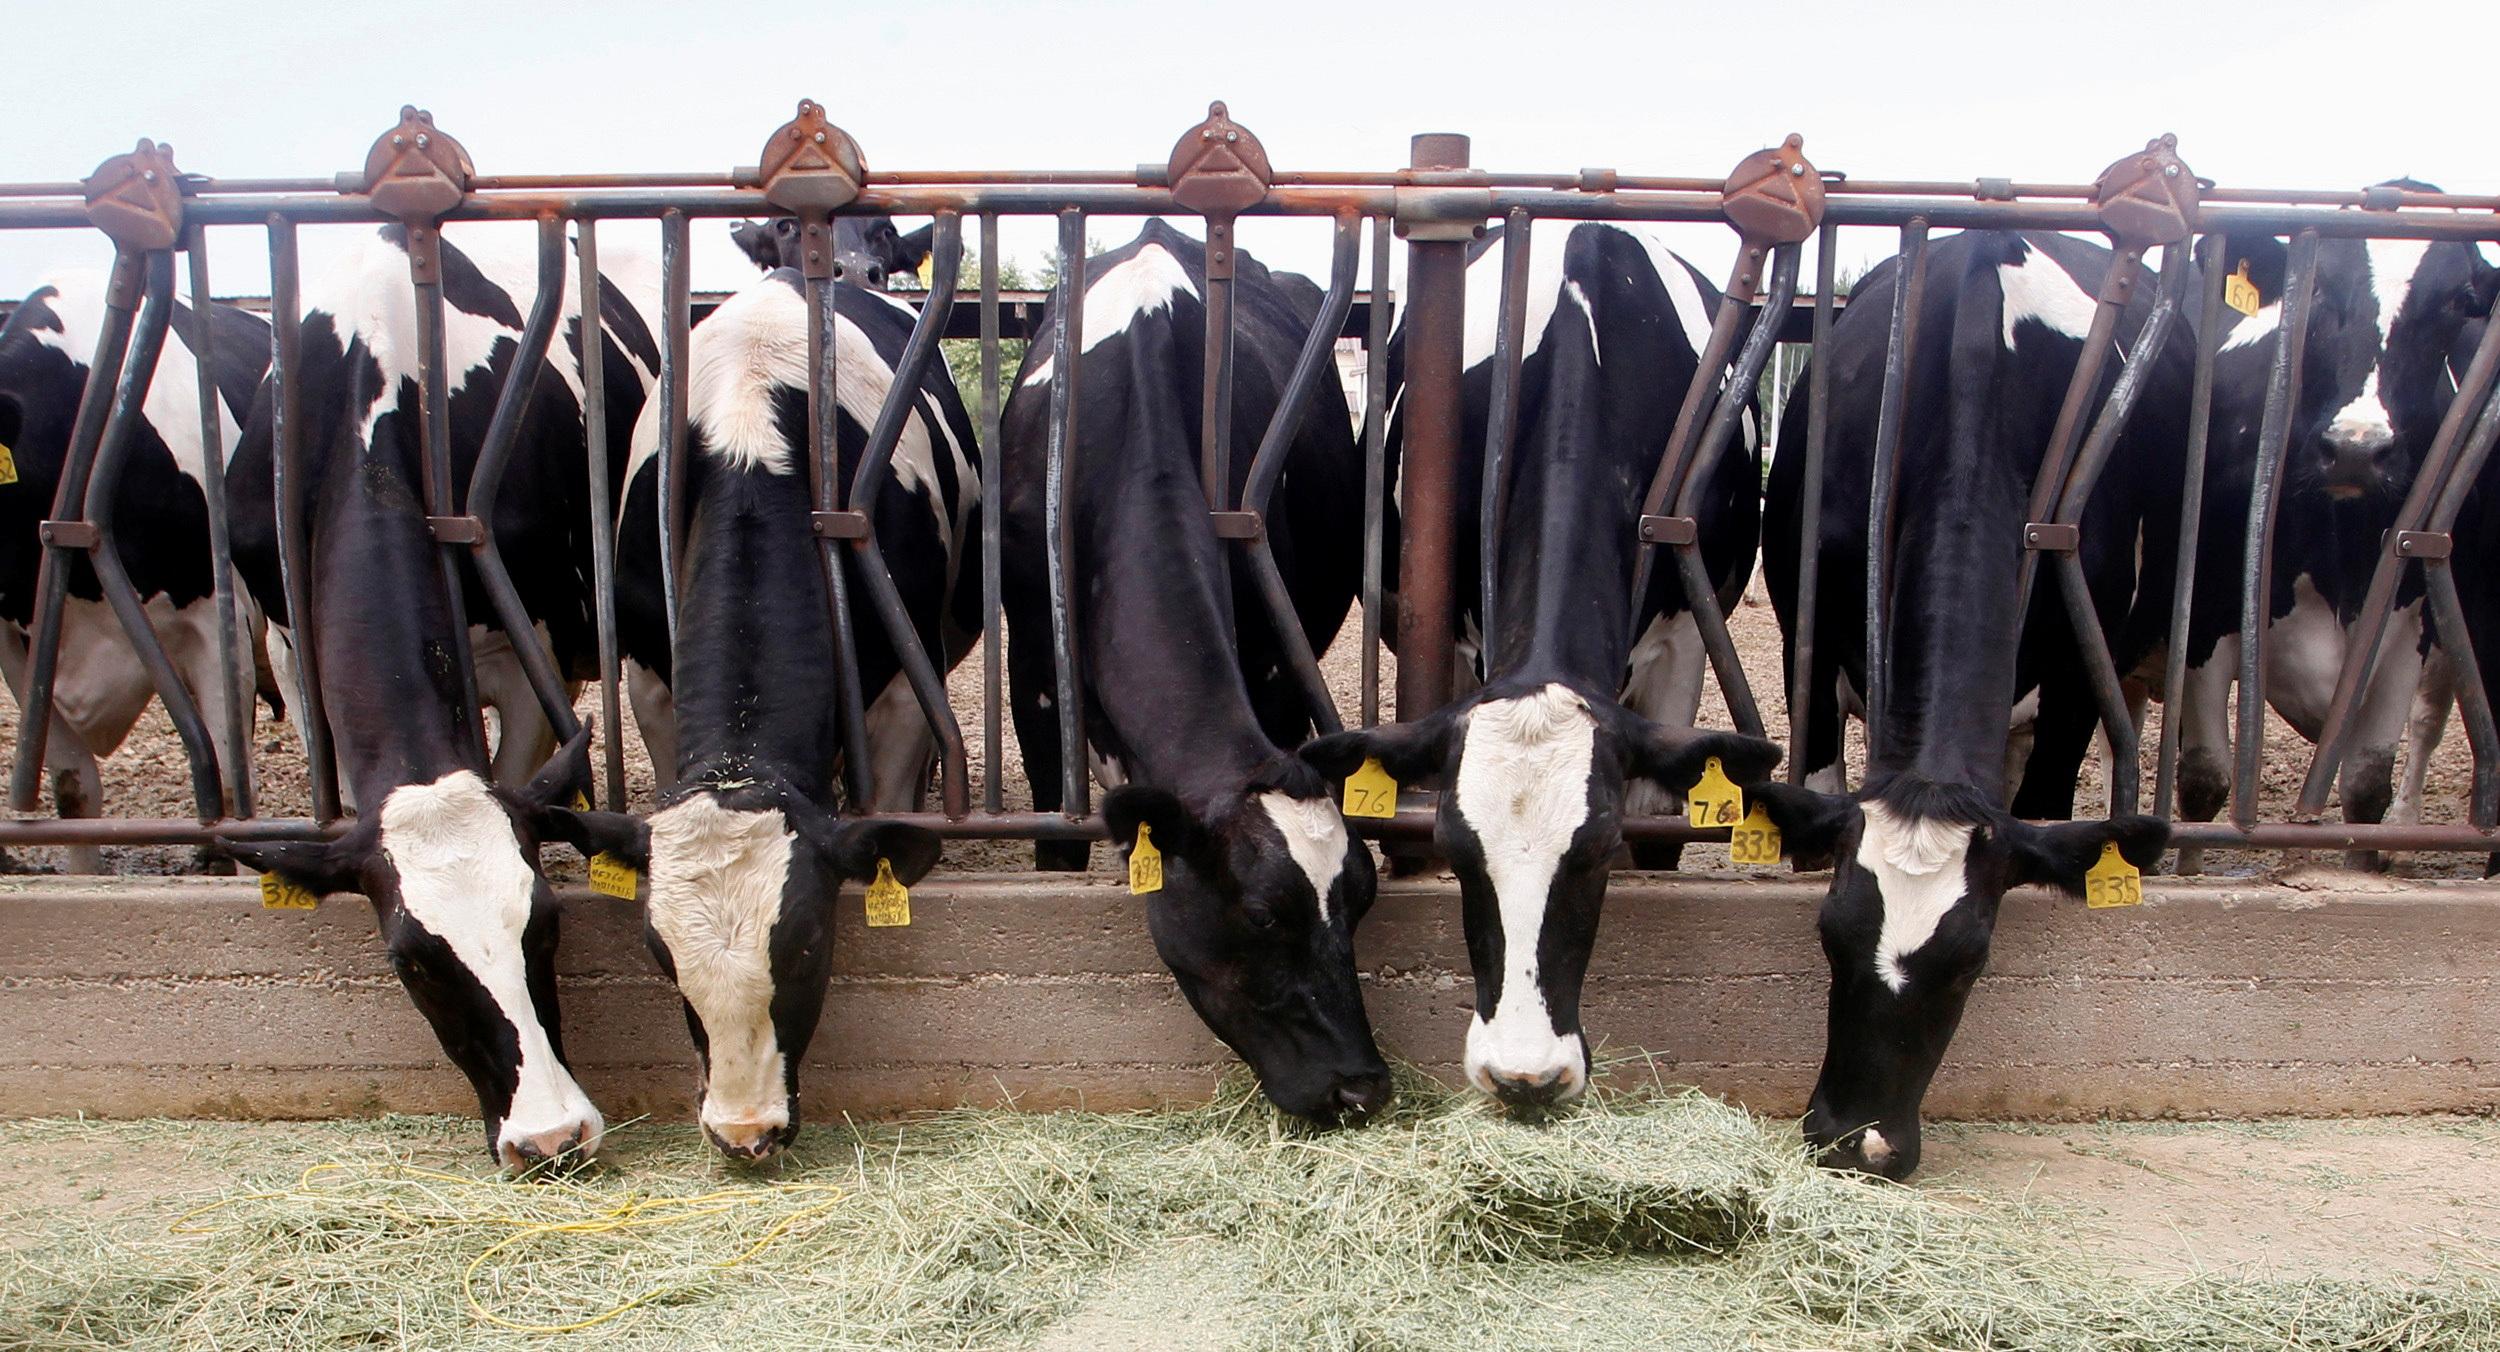 Dairy cows stand in a line to feed.